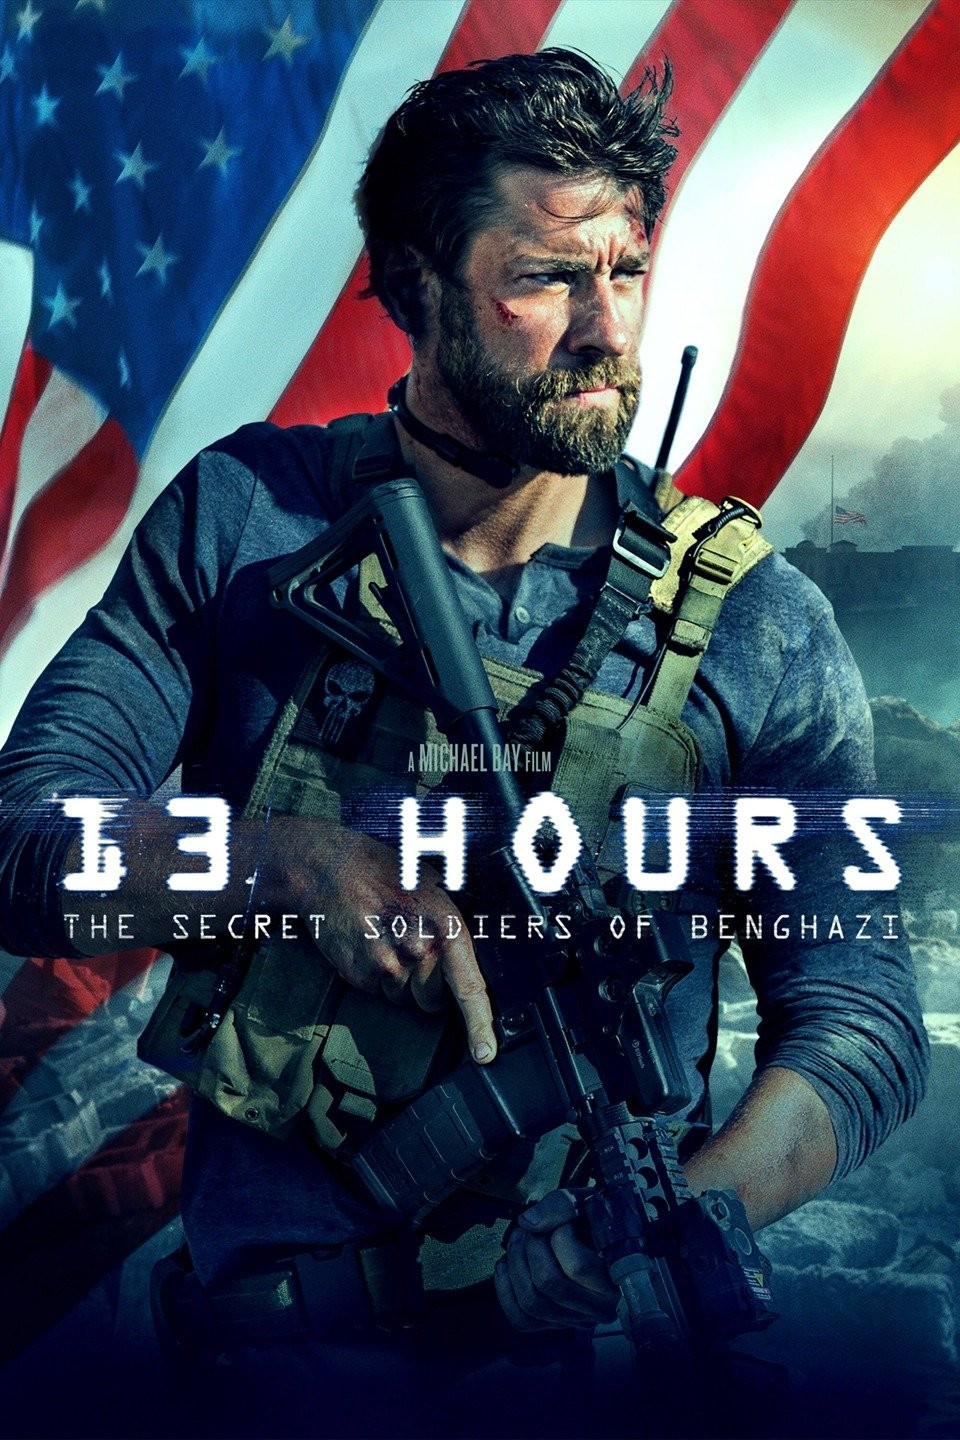 FULL MOVIE: 13 Hours: The Secret Soldiers of Benghazi (2016)